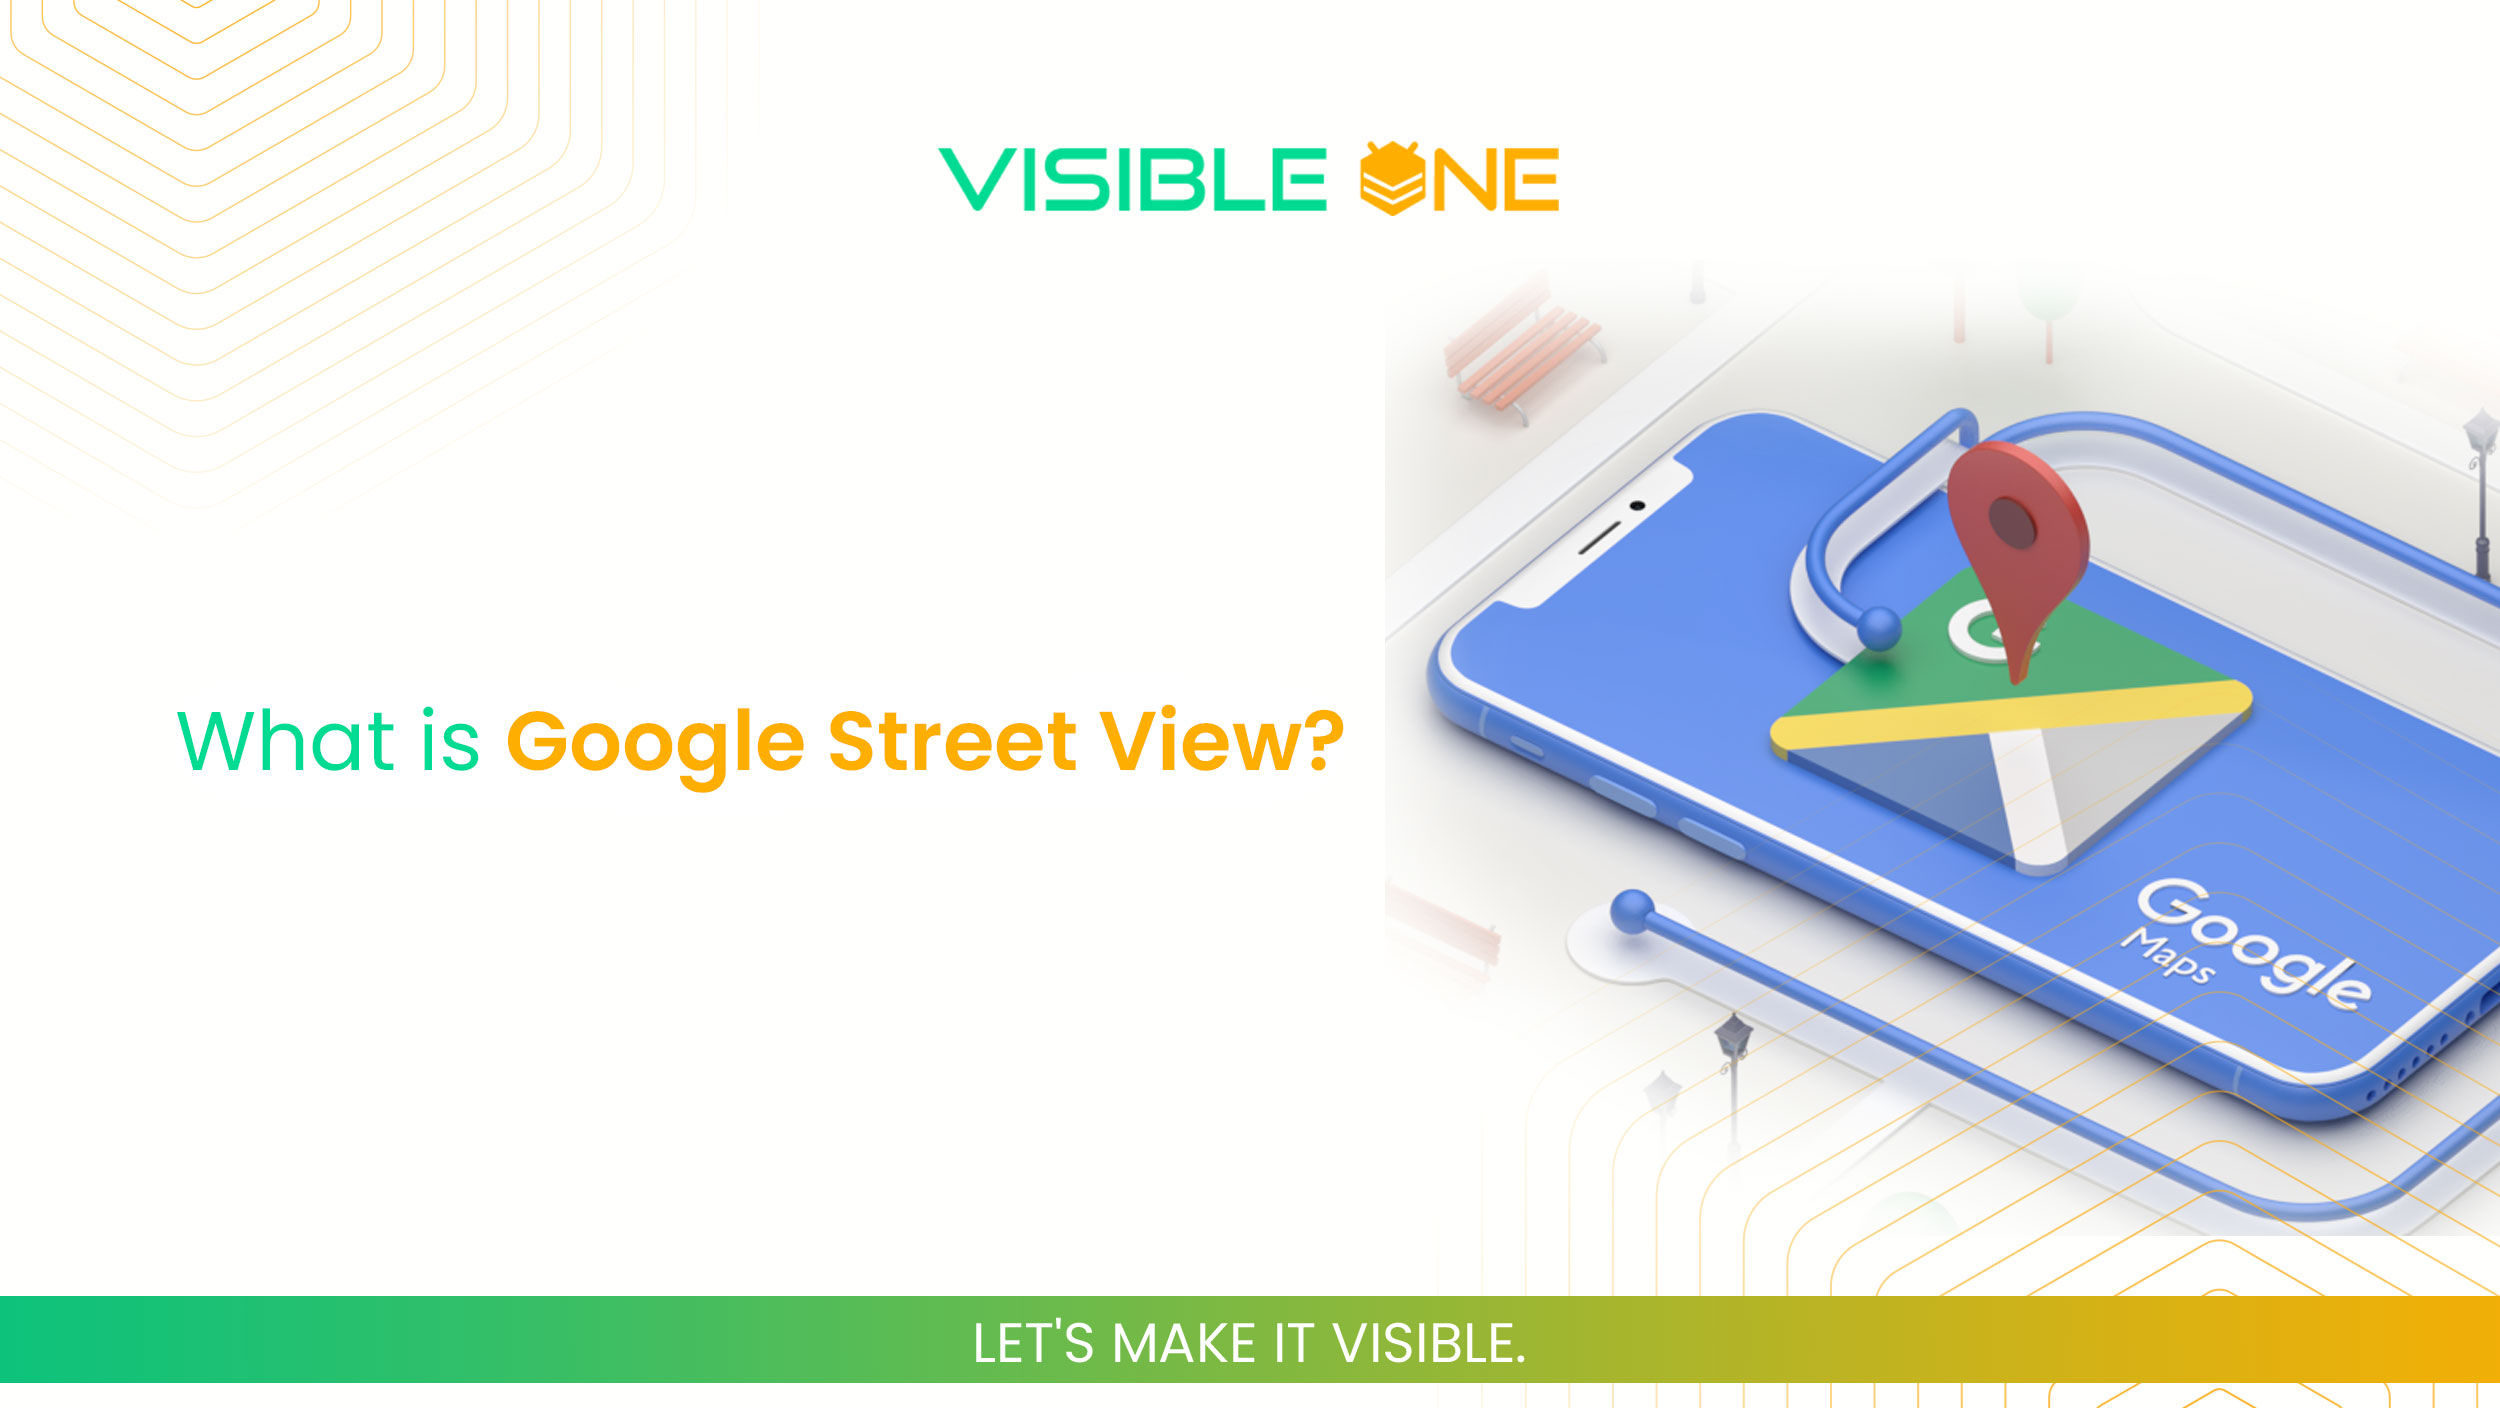 What is Google Street View?